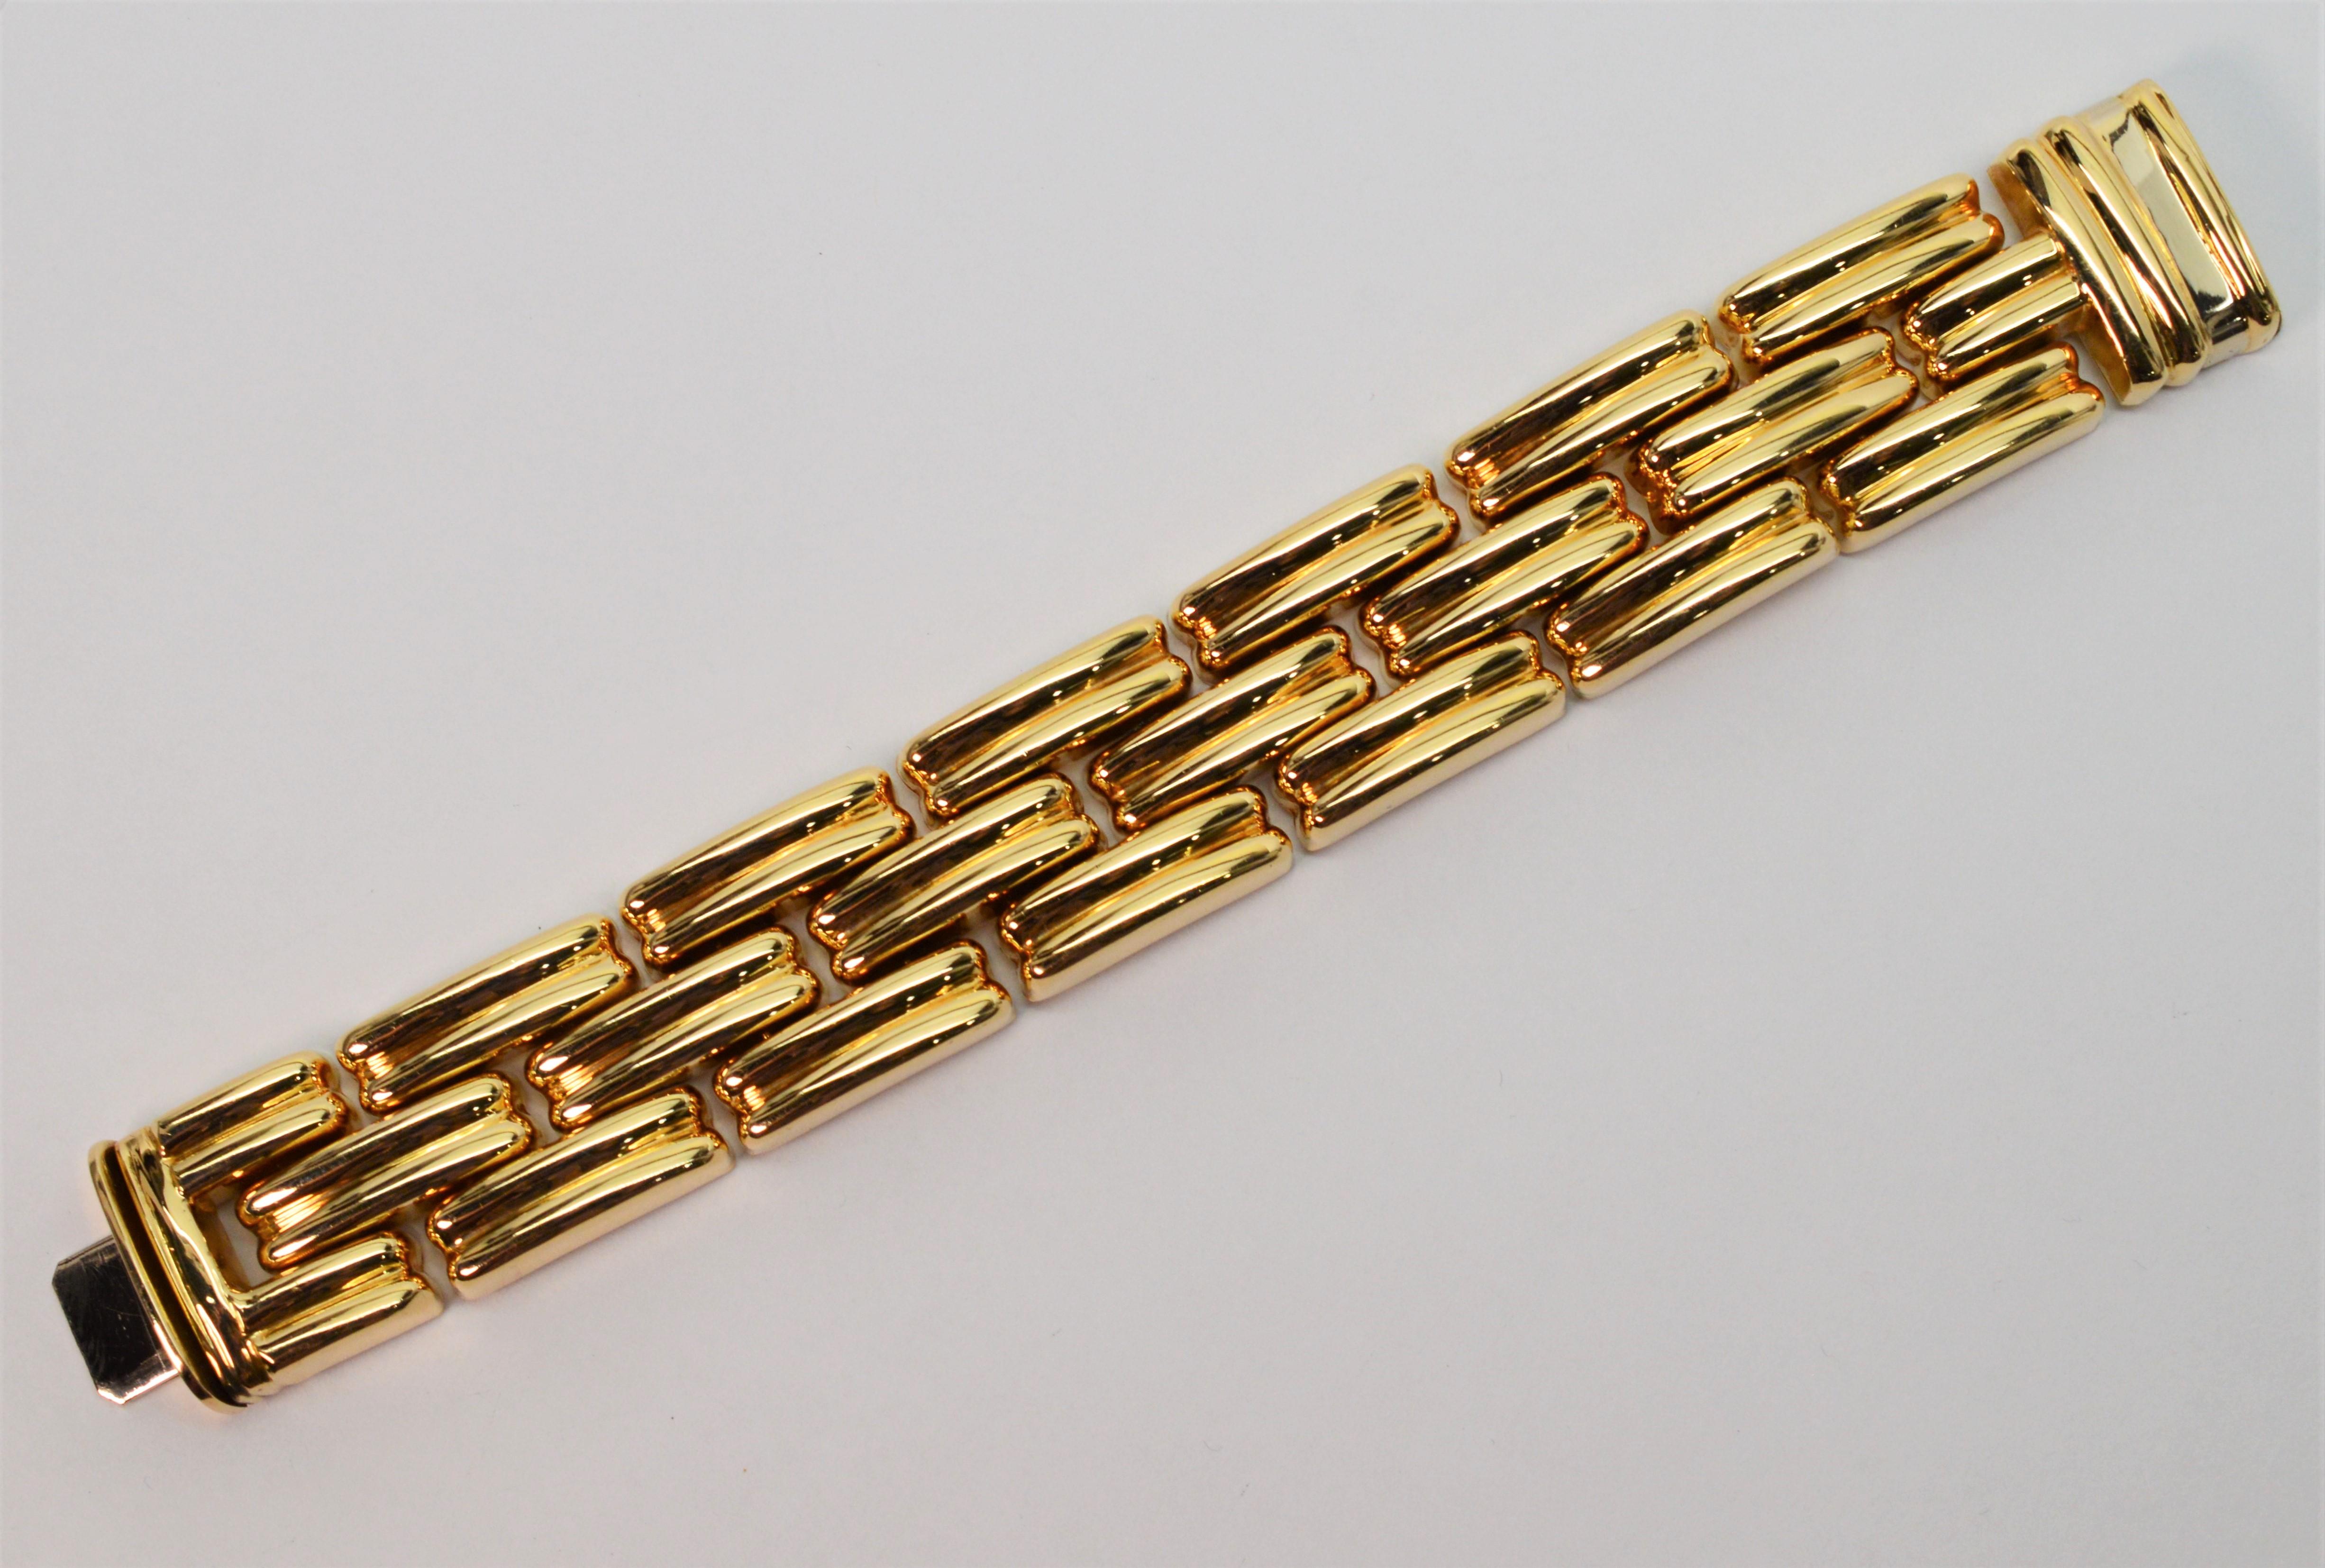 Italian Made Retro Style Yellow Gold Link Bracelet In Excellent Condition For Sale In Mount Kisco, NY